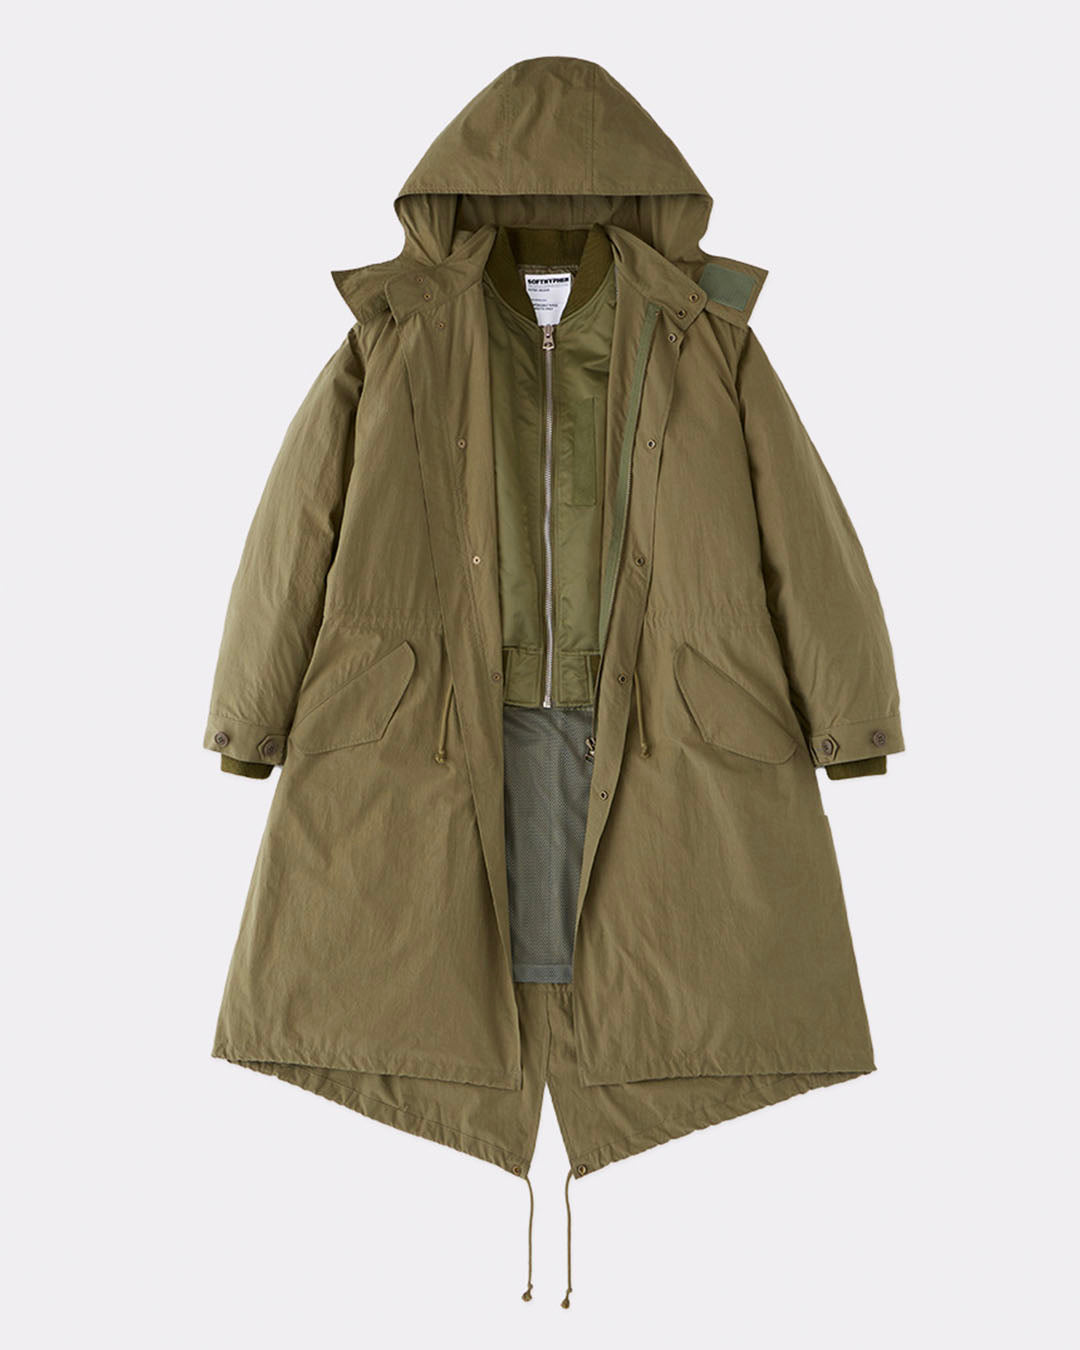 [SOFTHYPHEN] BACK TO FRONT MA-1 FIELD COAT - OLIVE